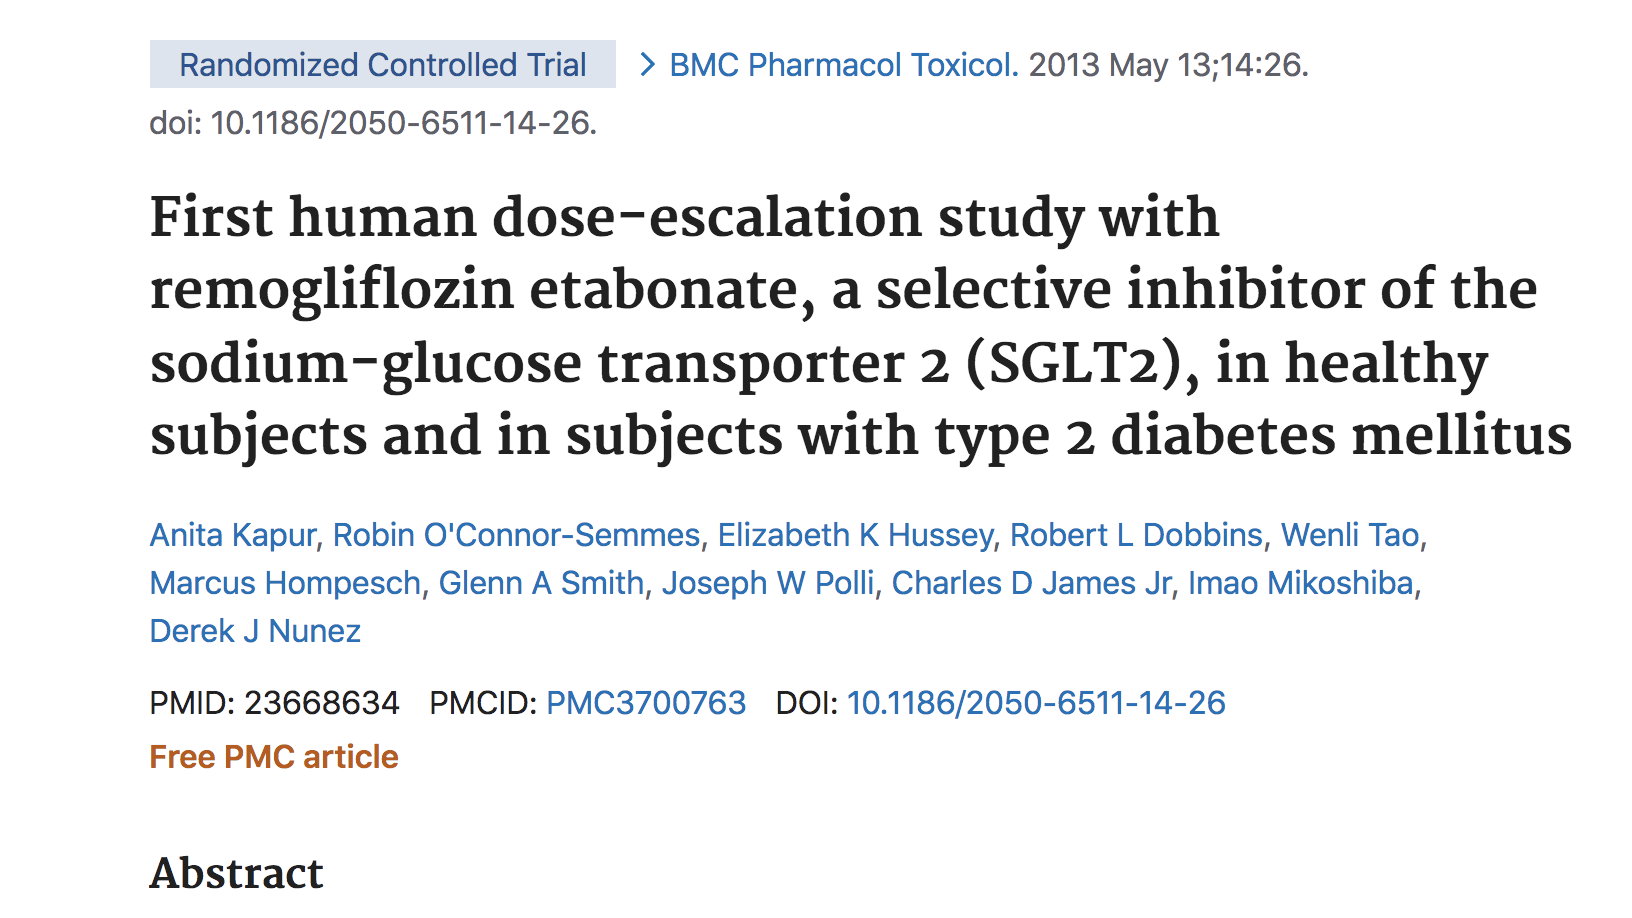 First human dose-escalation study with remogliflozin etabonate, a selective inhibitor of the sodium-glucose transporter 2 (SGLT2), in healthy subjects and in subjects with type 2 diabetes mellitus thumbnail